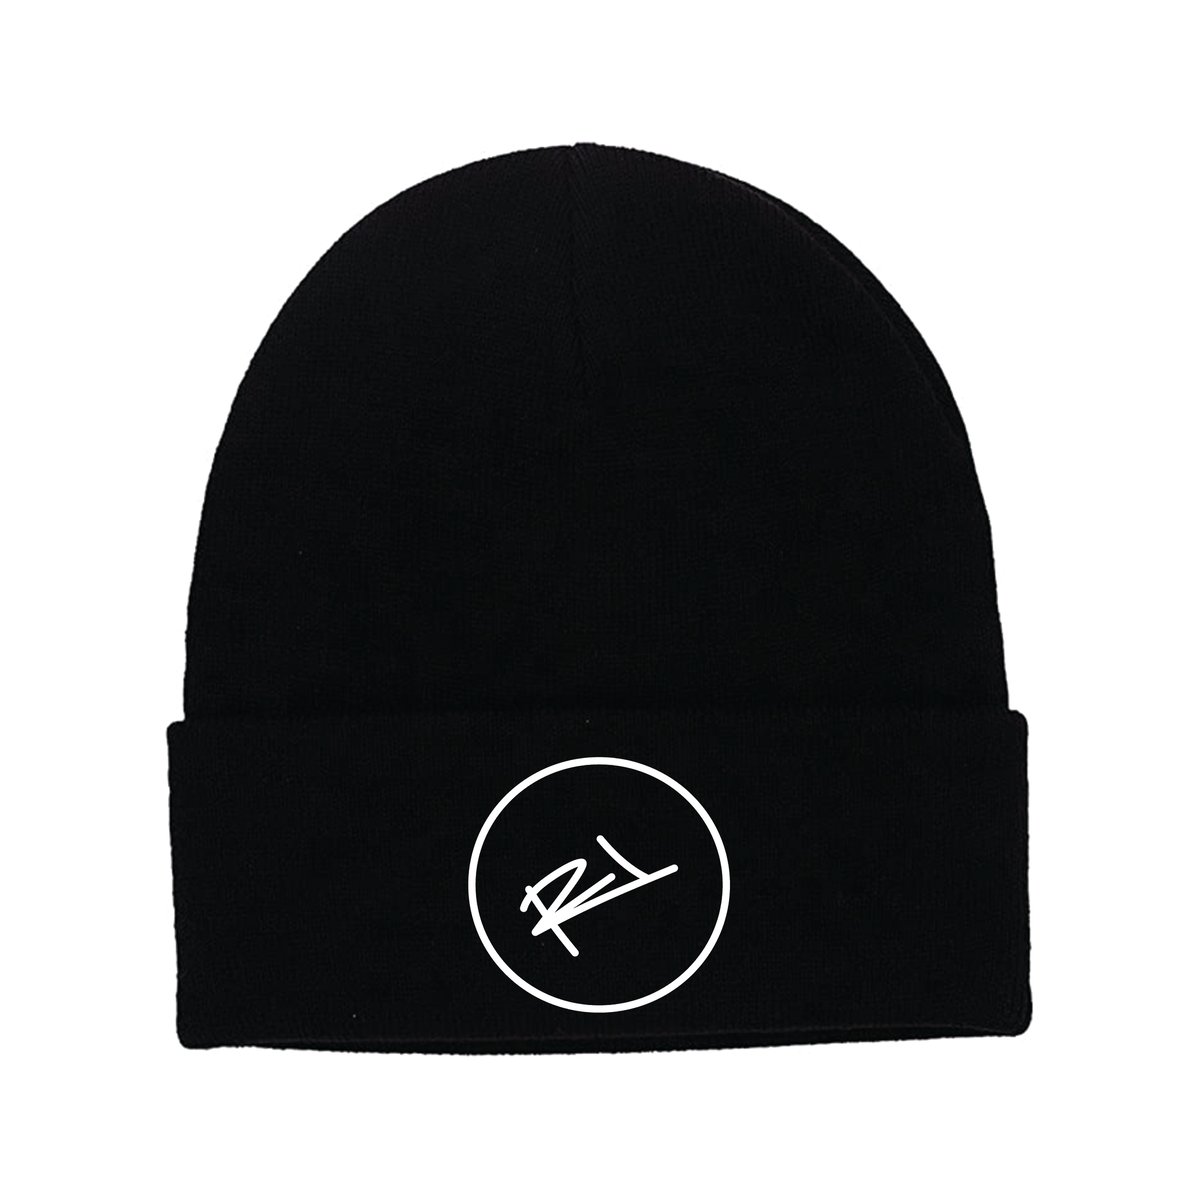 Image of THE SIGNATURE REL LOGO BEANIE IN BLACK 